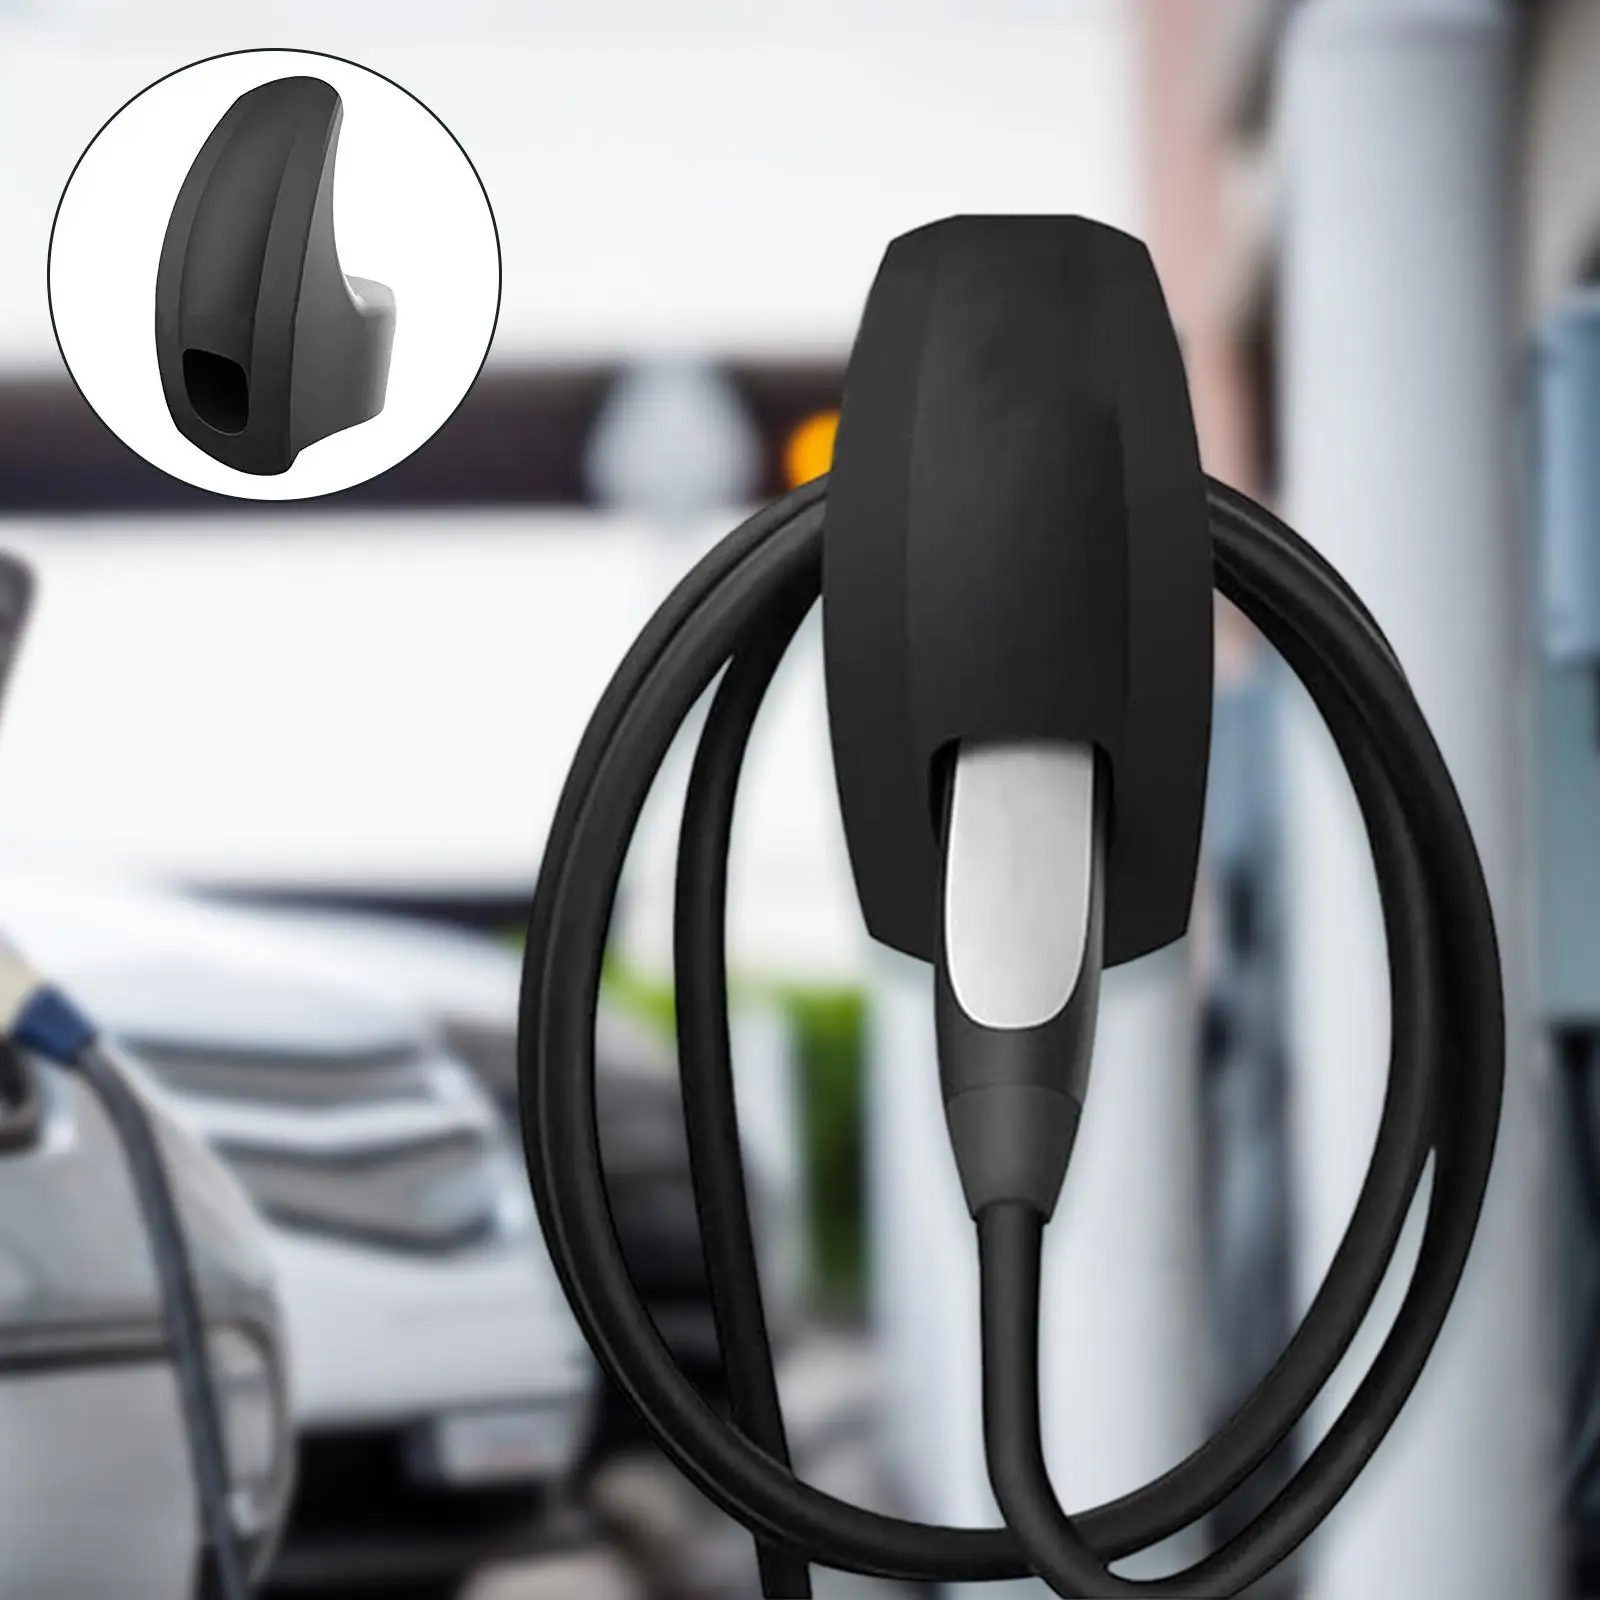 Car Charging Cable Organizer Wall Mount Holder For Tesla Model 3 S X Y